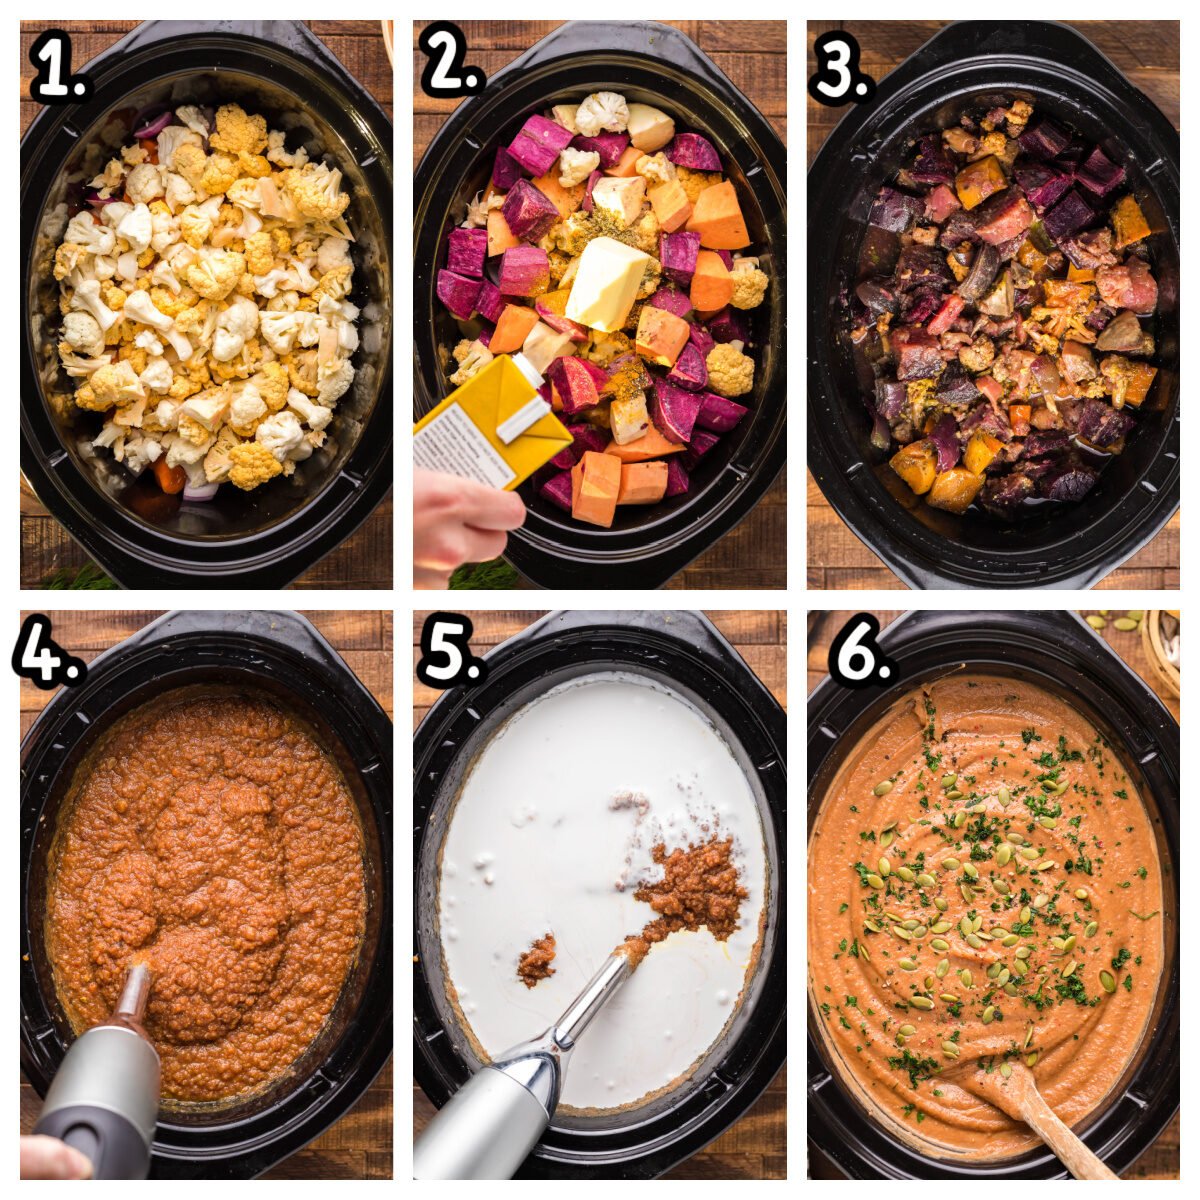 6 images about how to cook sweet potato soup in crockpot.